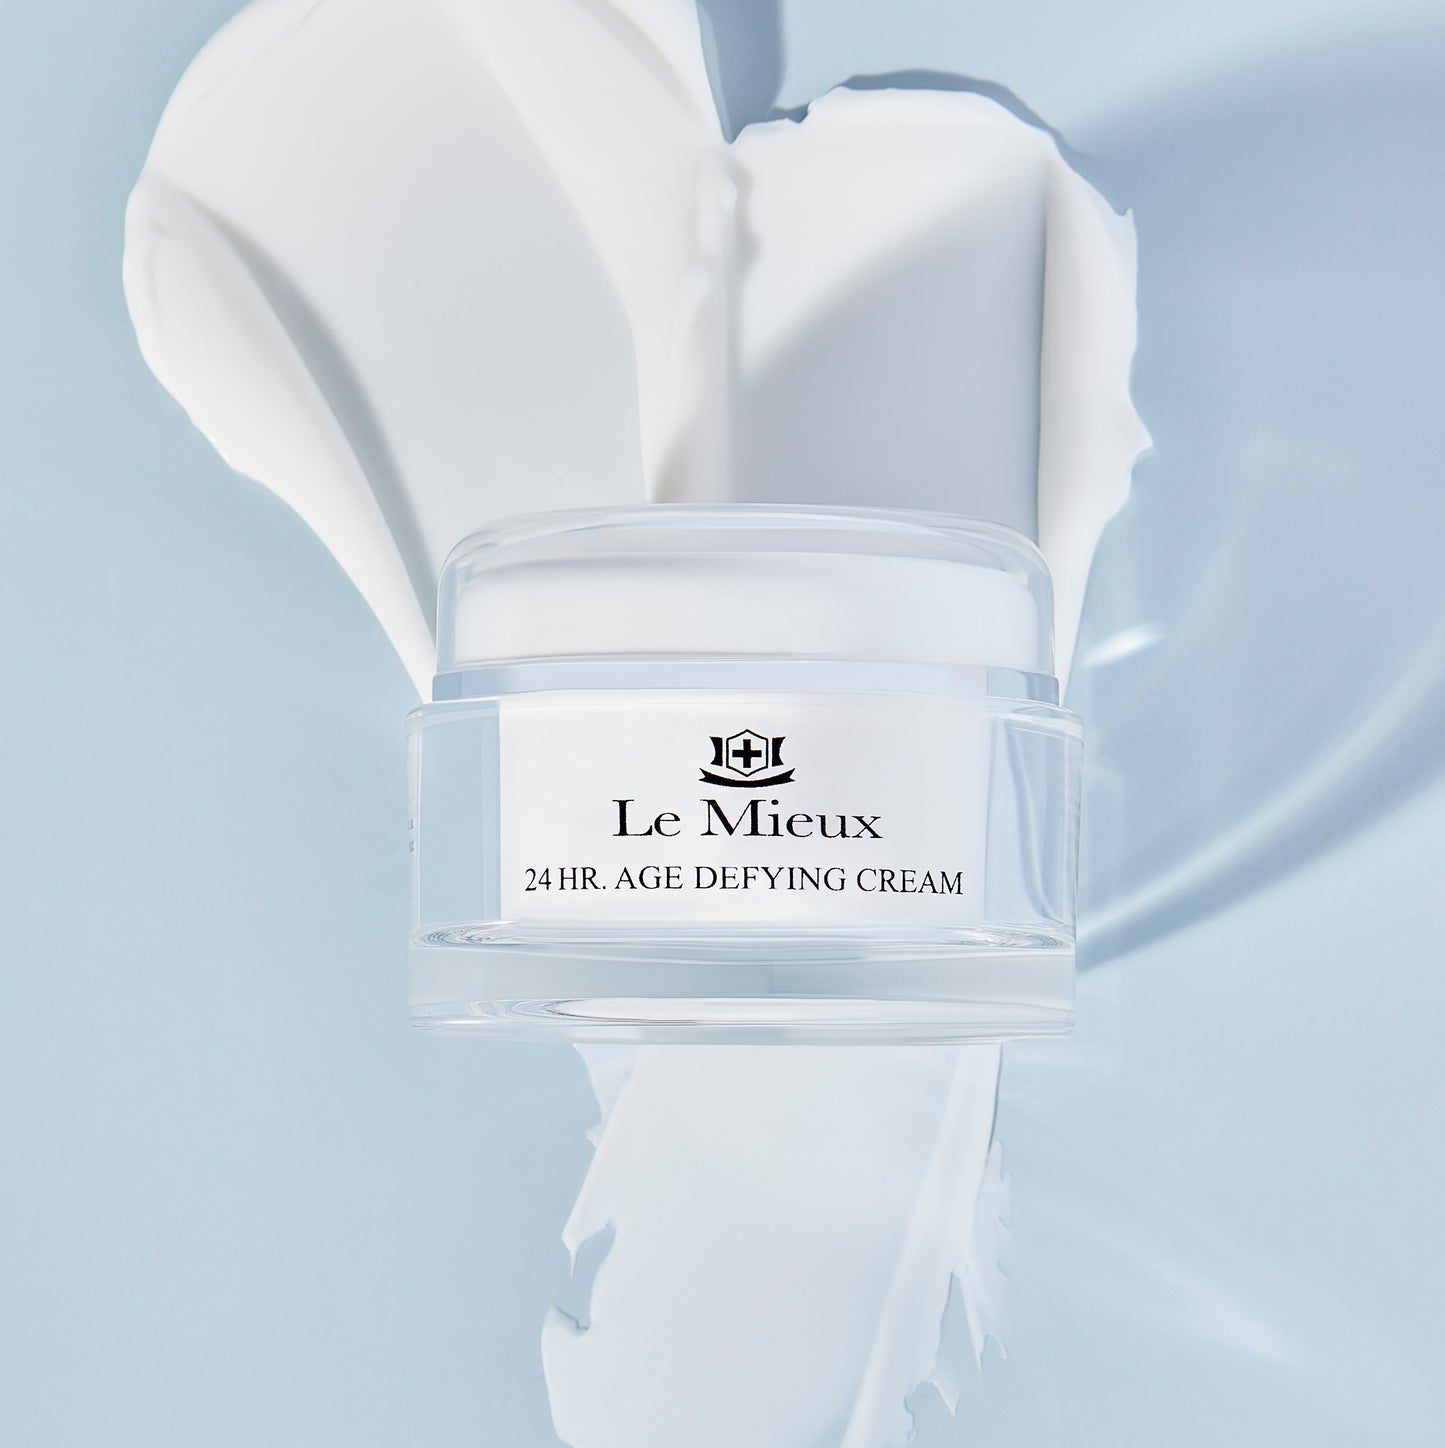 24 HR. AGE DEFYING CREAM from Le Mieux 